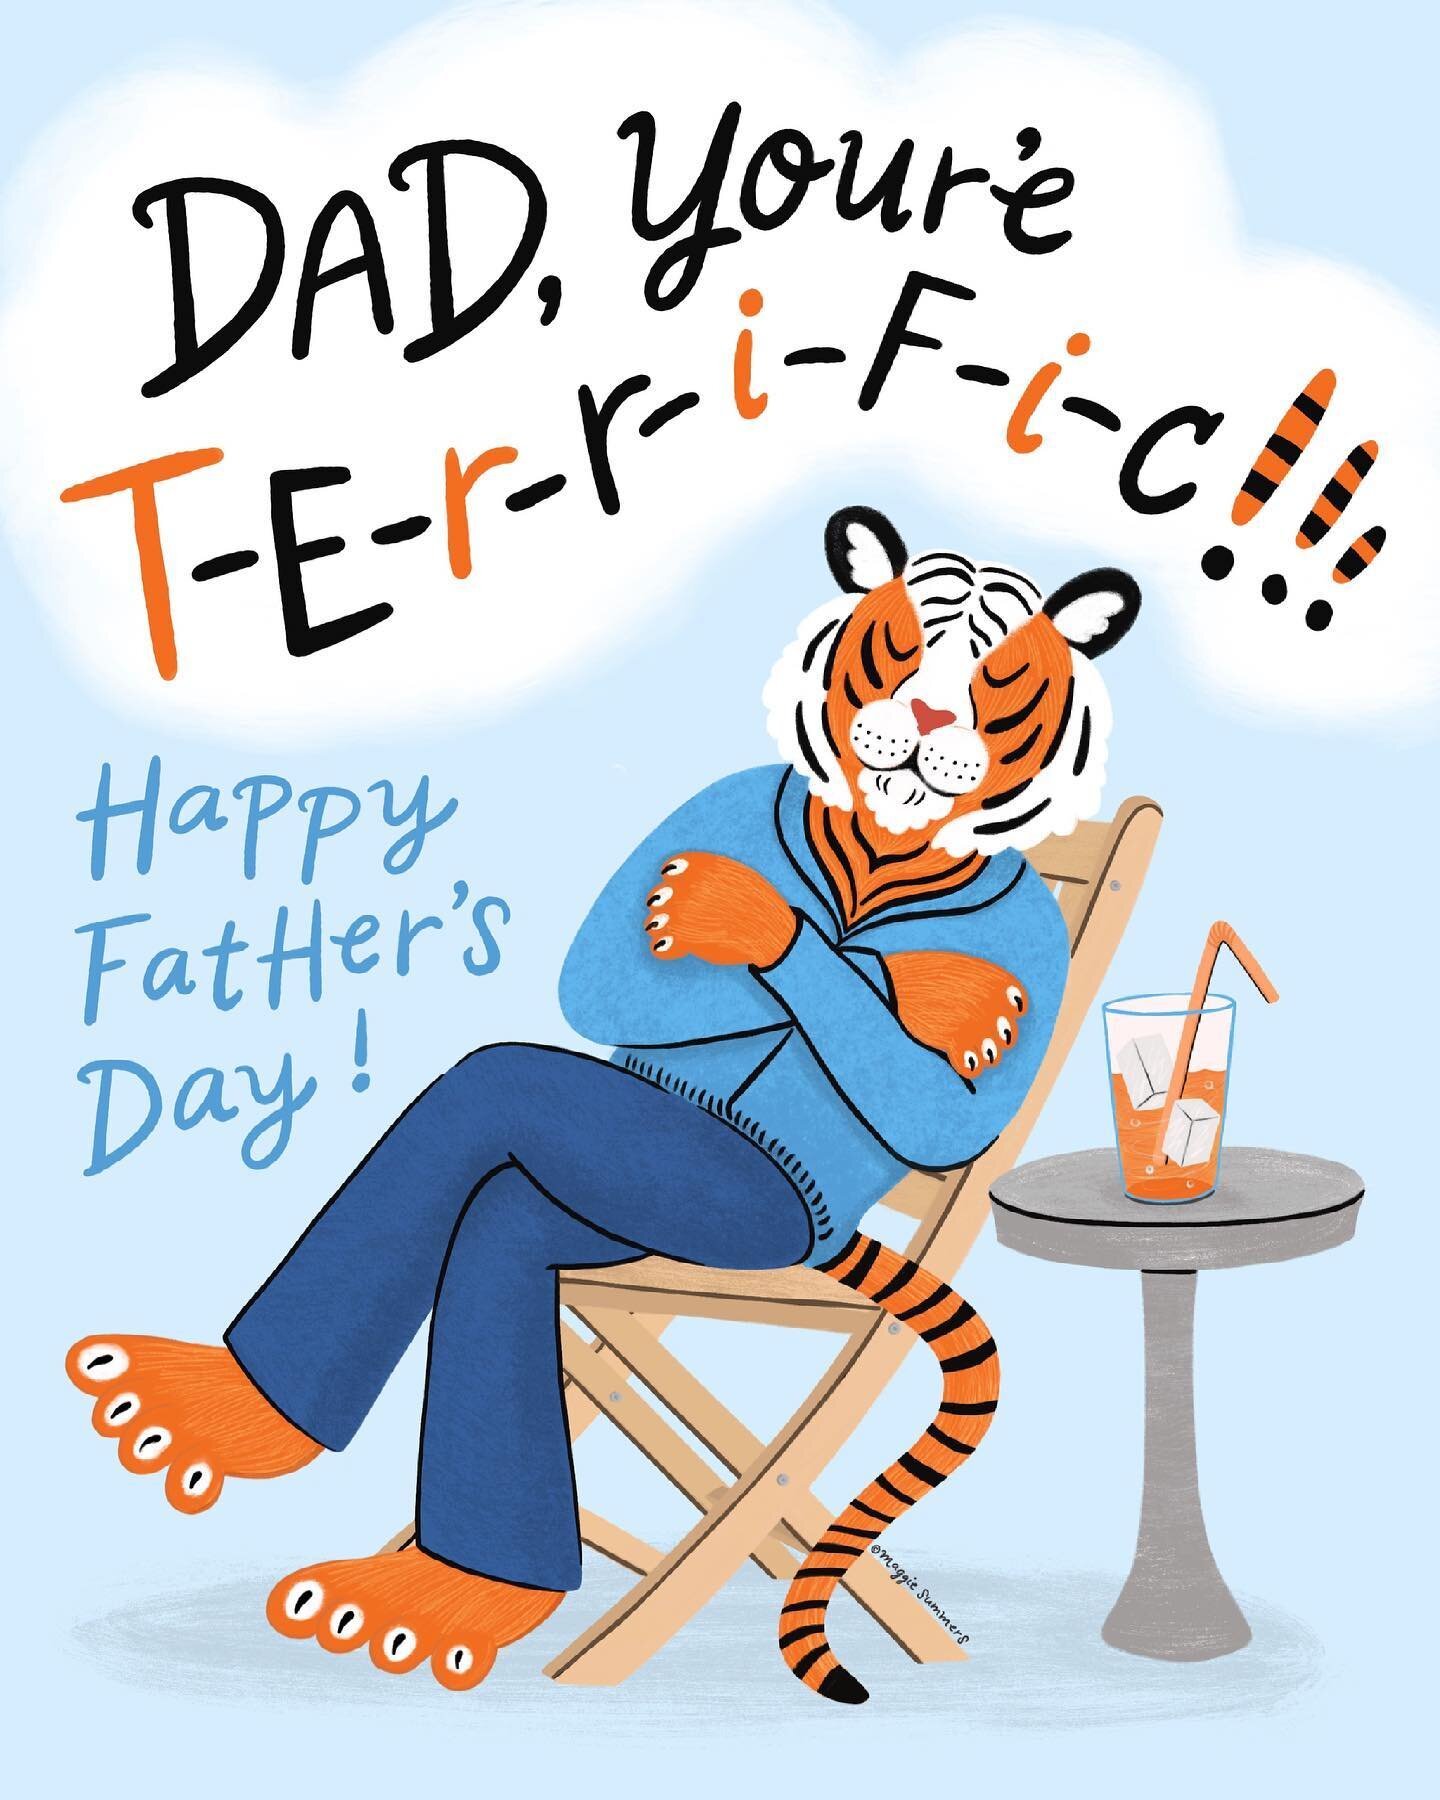 Happy Father&rsquo;s Day to all the the Dad&rsquo;s out there, especially the Terrific ones in my life❣️▫️.
#fathersday #happyfathersday #youreterrific #weloveyou #dadsday